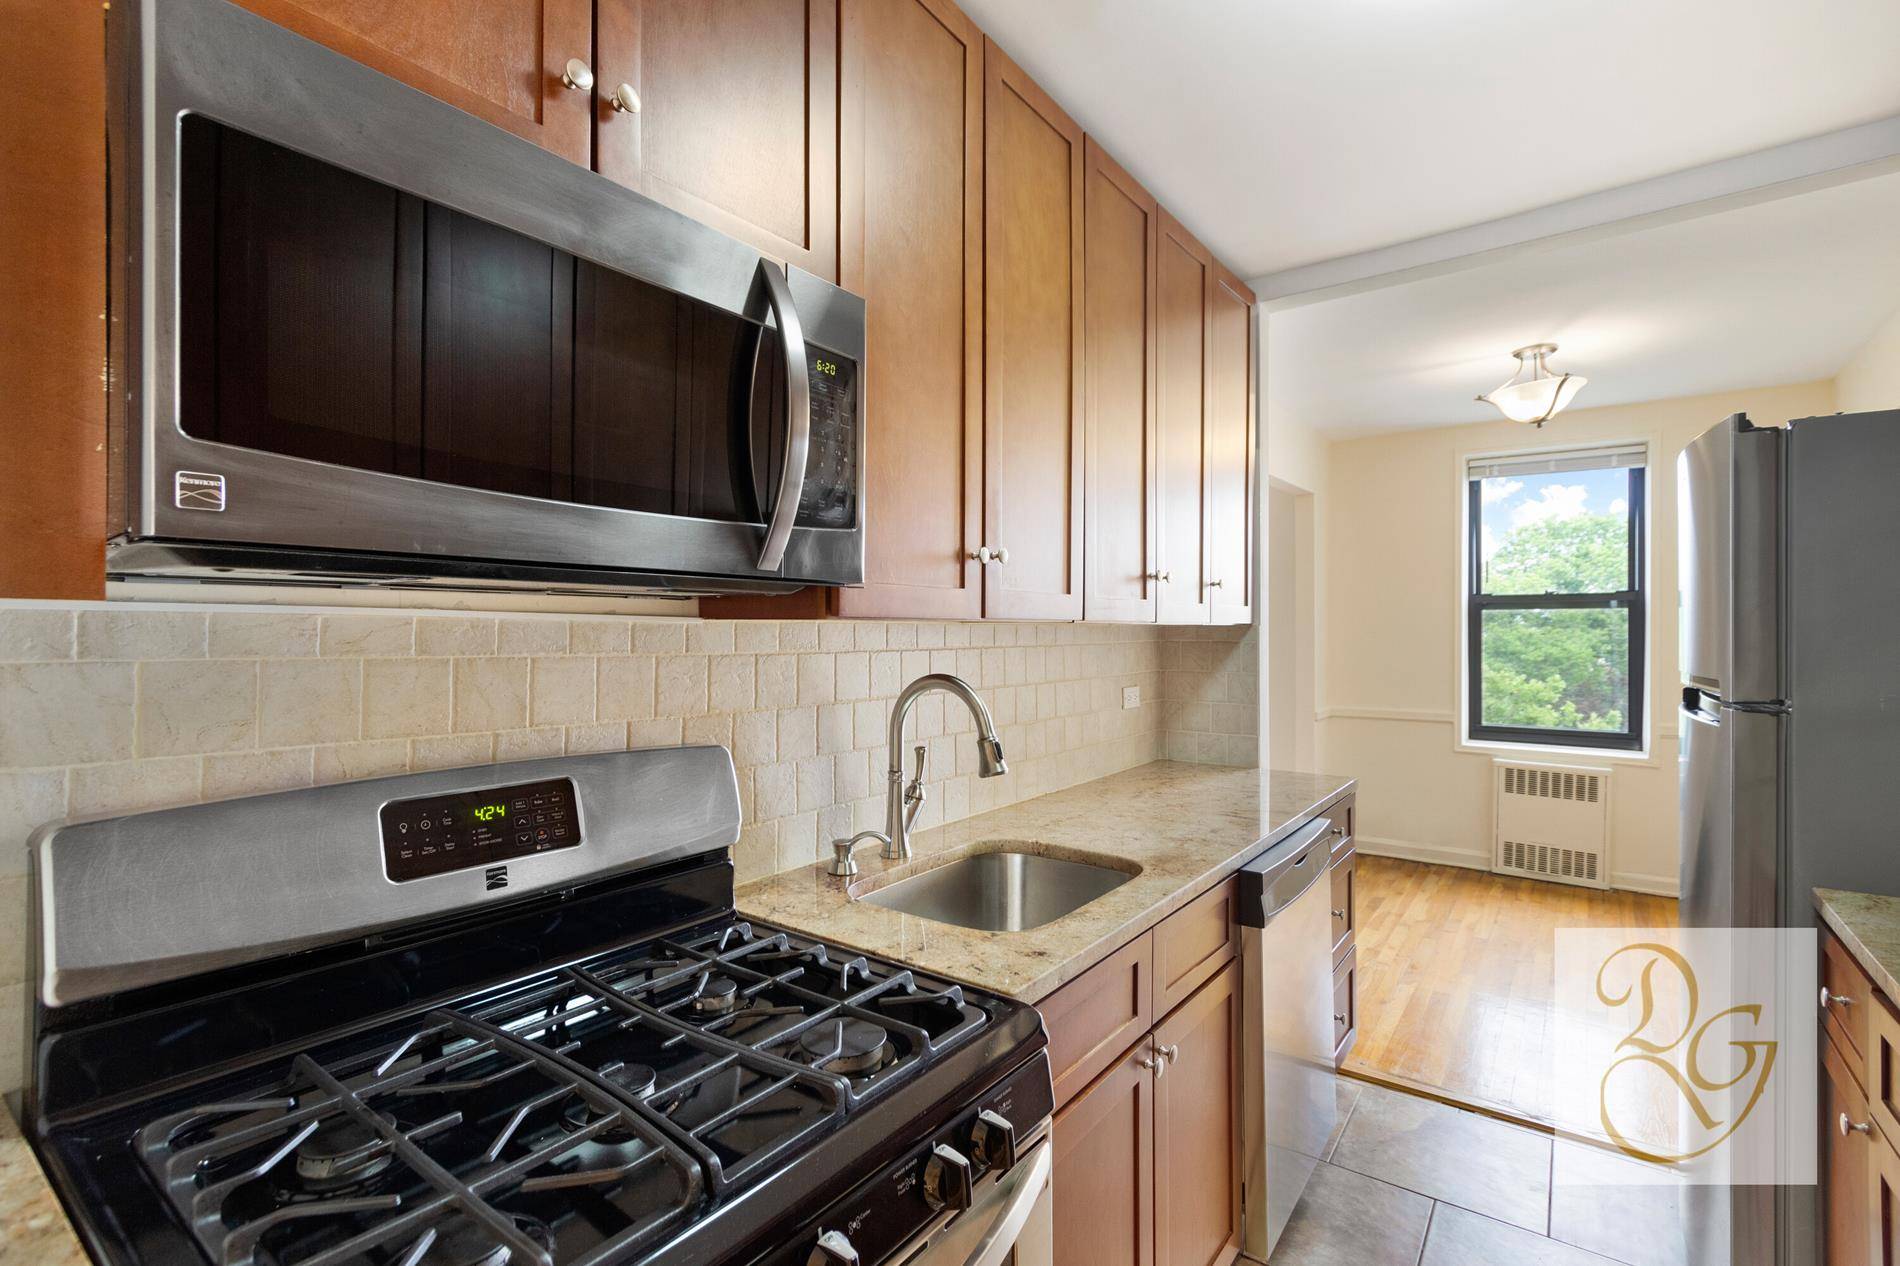 Welcome to this bright and sunny, spacious, true 2 bedroom corner unit apartment located on a high floor in one of Bay Ridge s well sought after pet friendly elevator ...